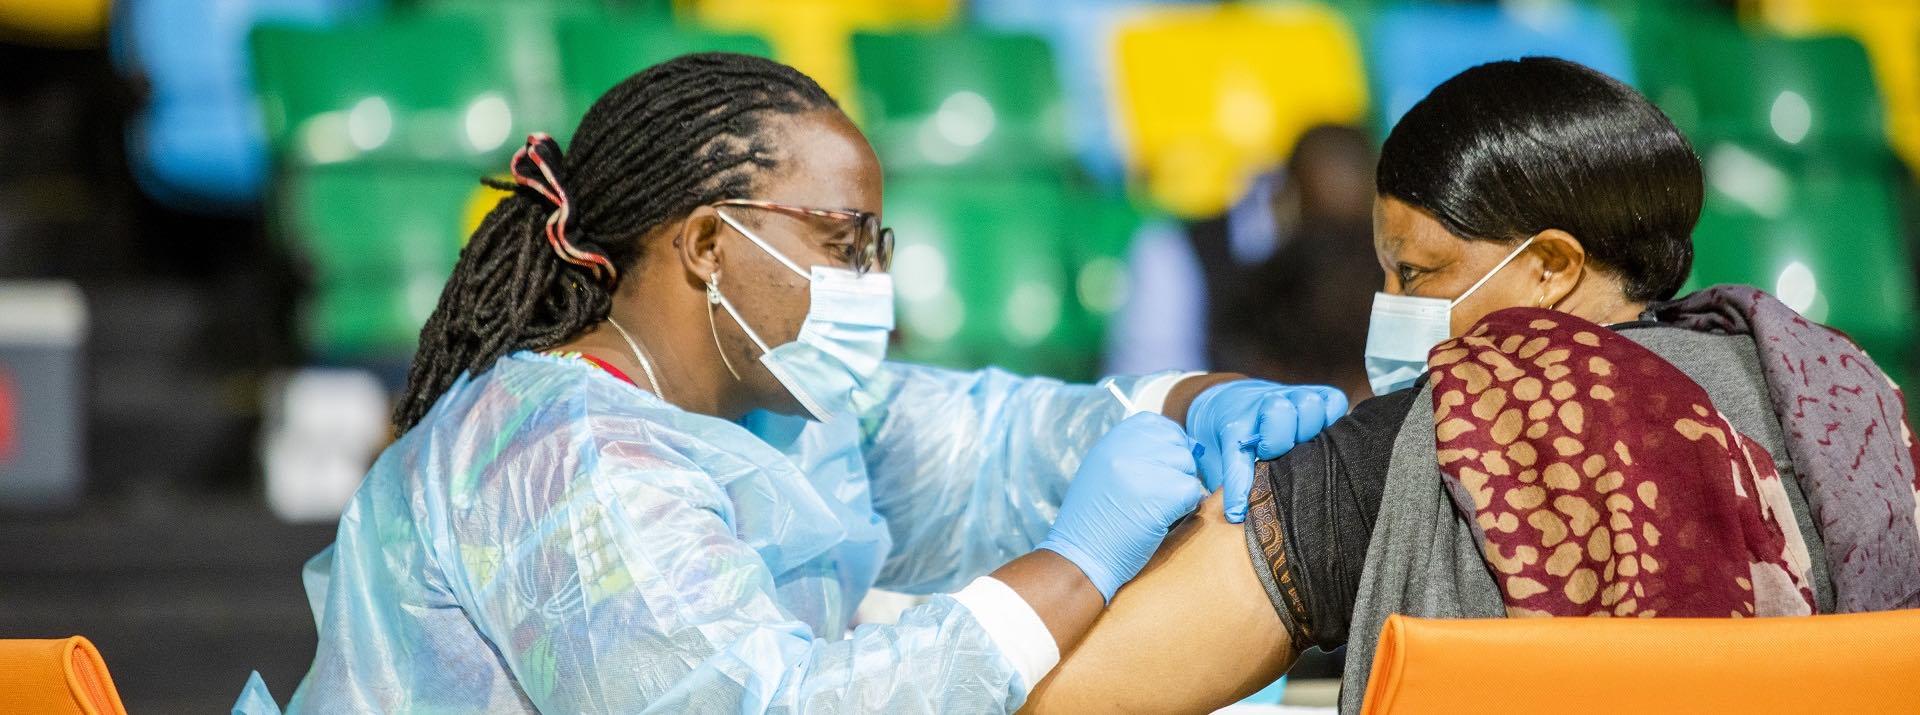 Africa on track to control COVID-19 pandemic in 2022